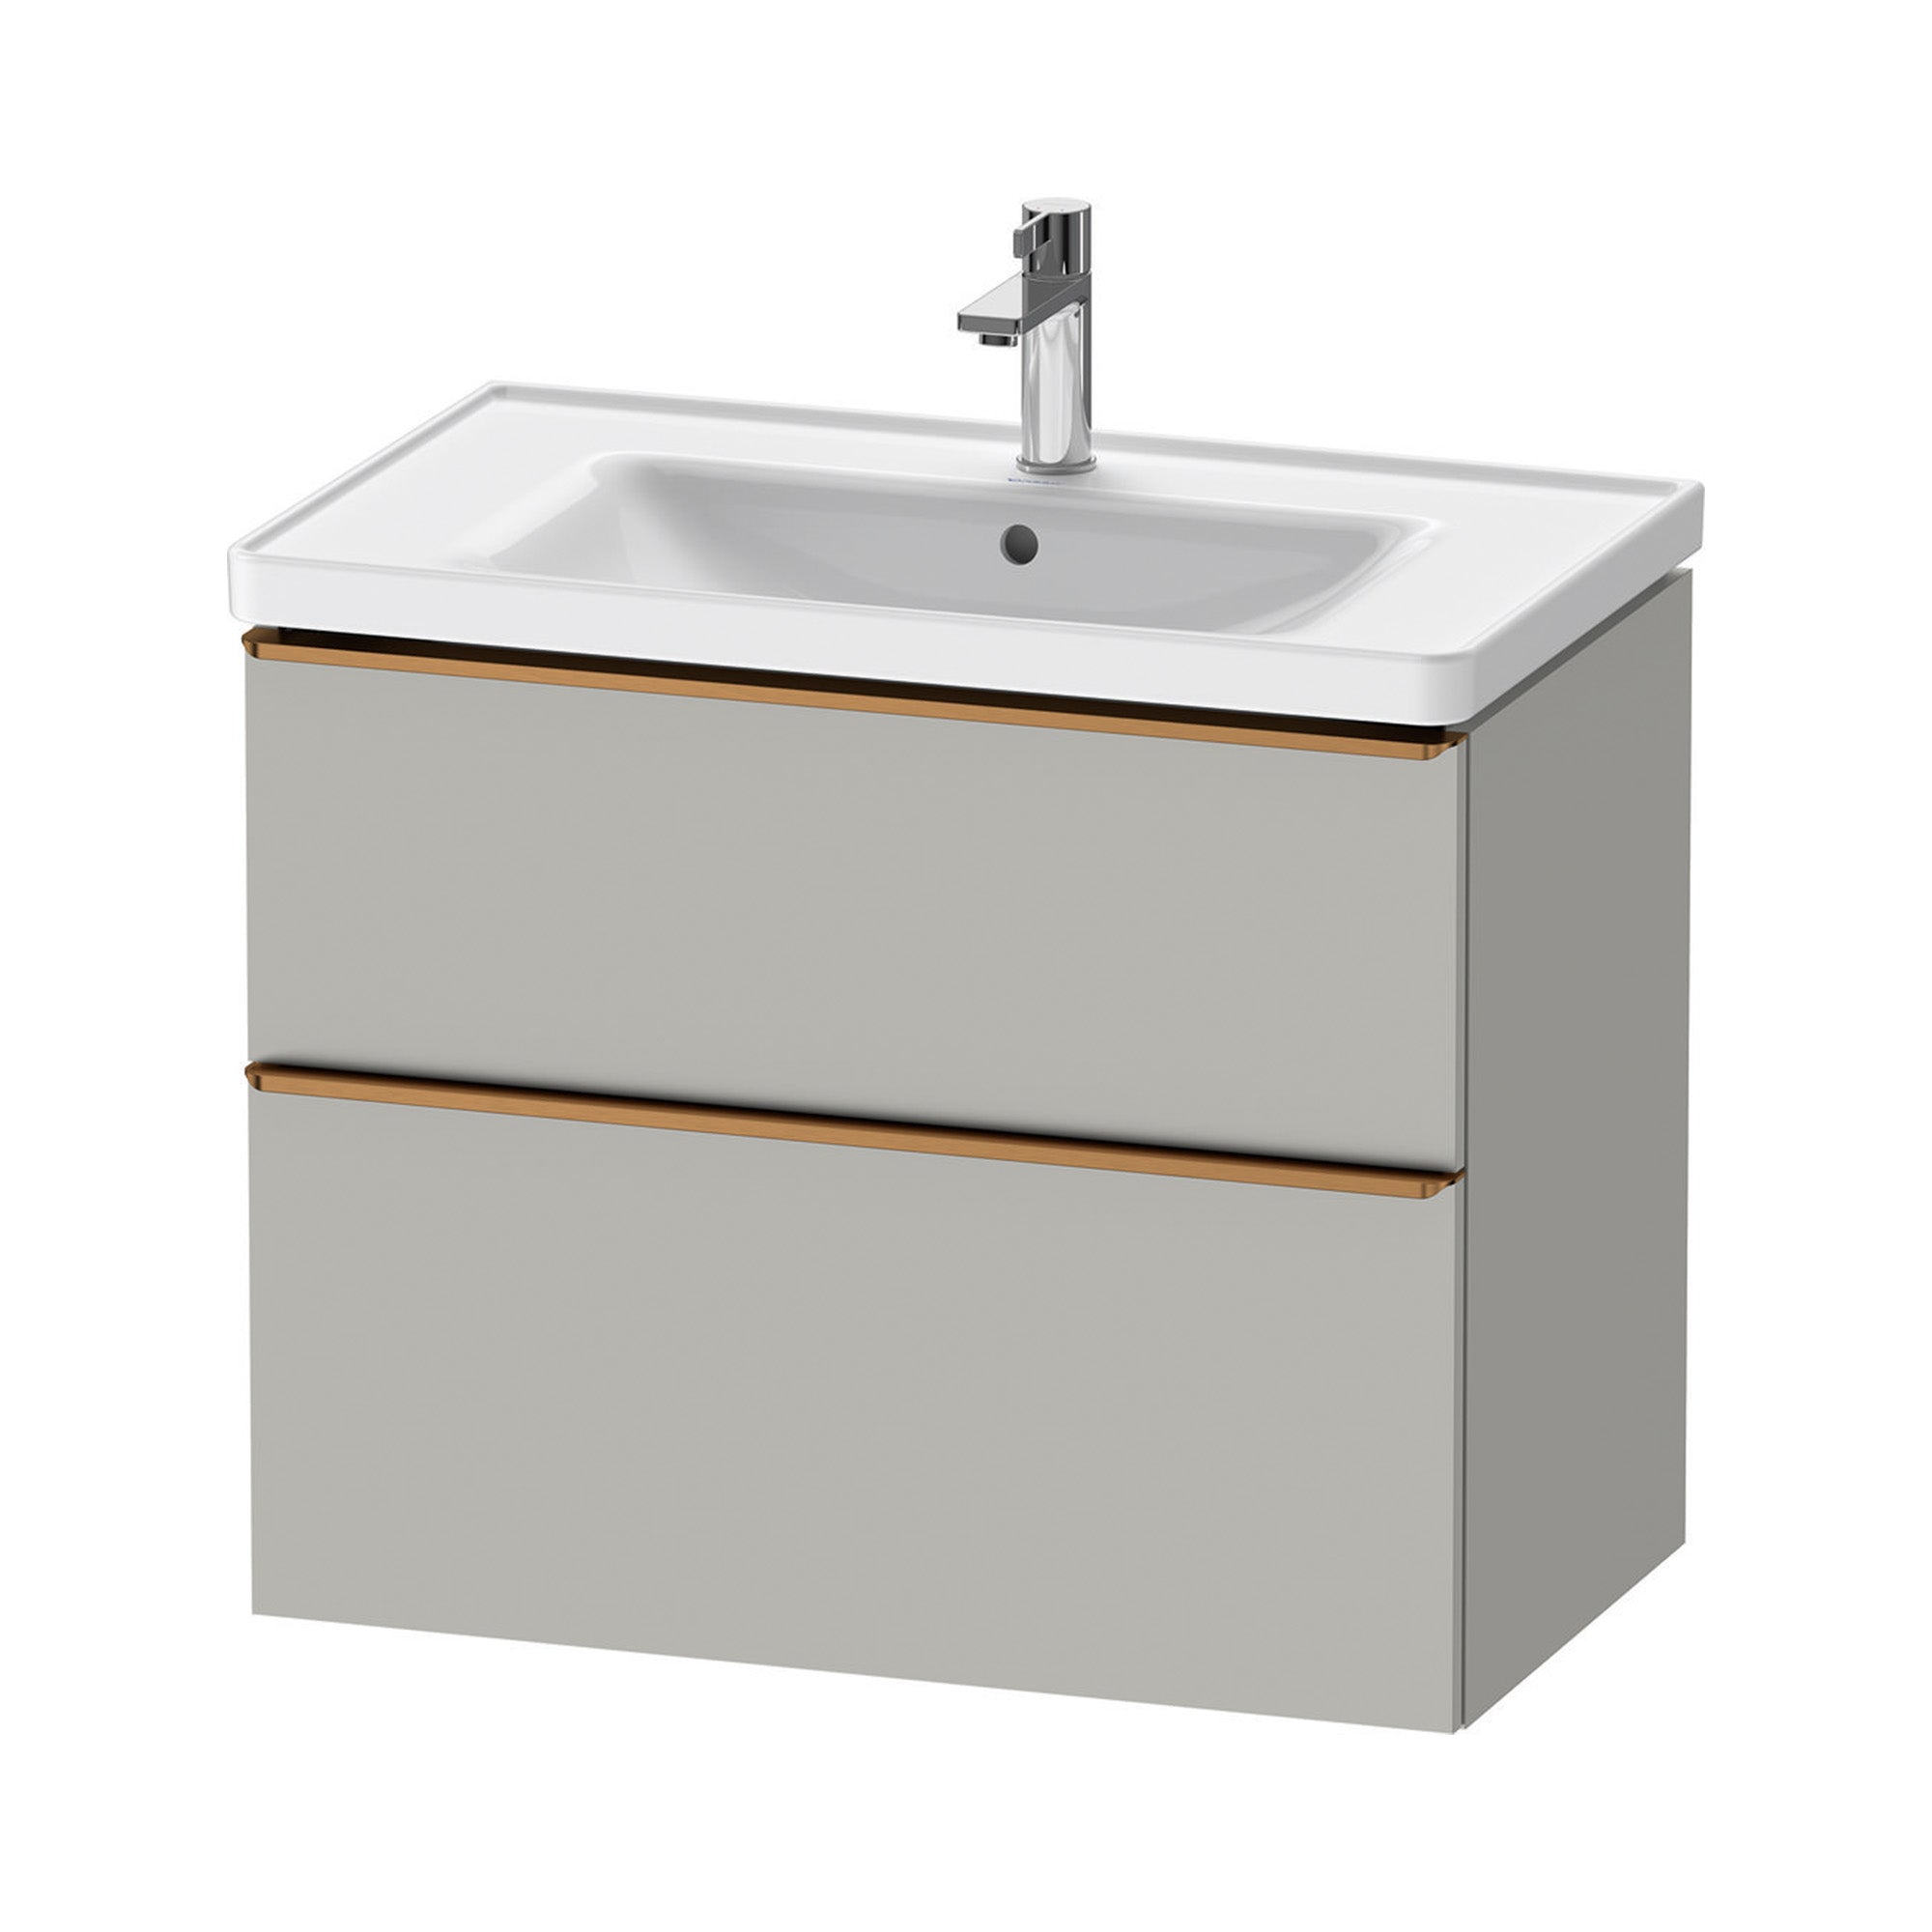 duravit d-neo 800mm wall mounted vanity unit with d-neo basin concrete grey brushed bronze handles